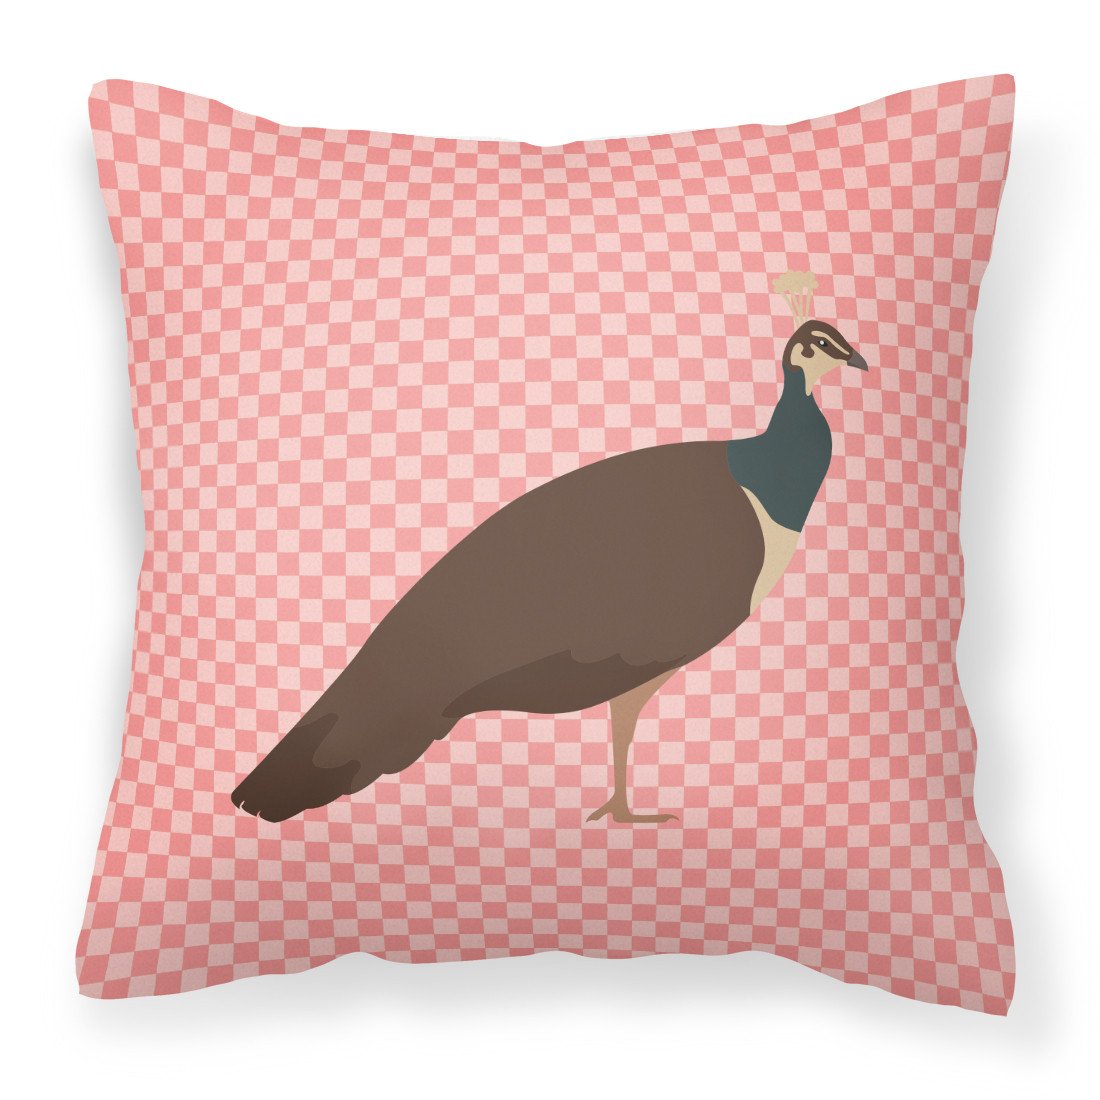 Indian Peahen Peafowl Pink Check Fabric Decorative Pillow BB7927PW1818 by Caroline's Treasures